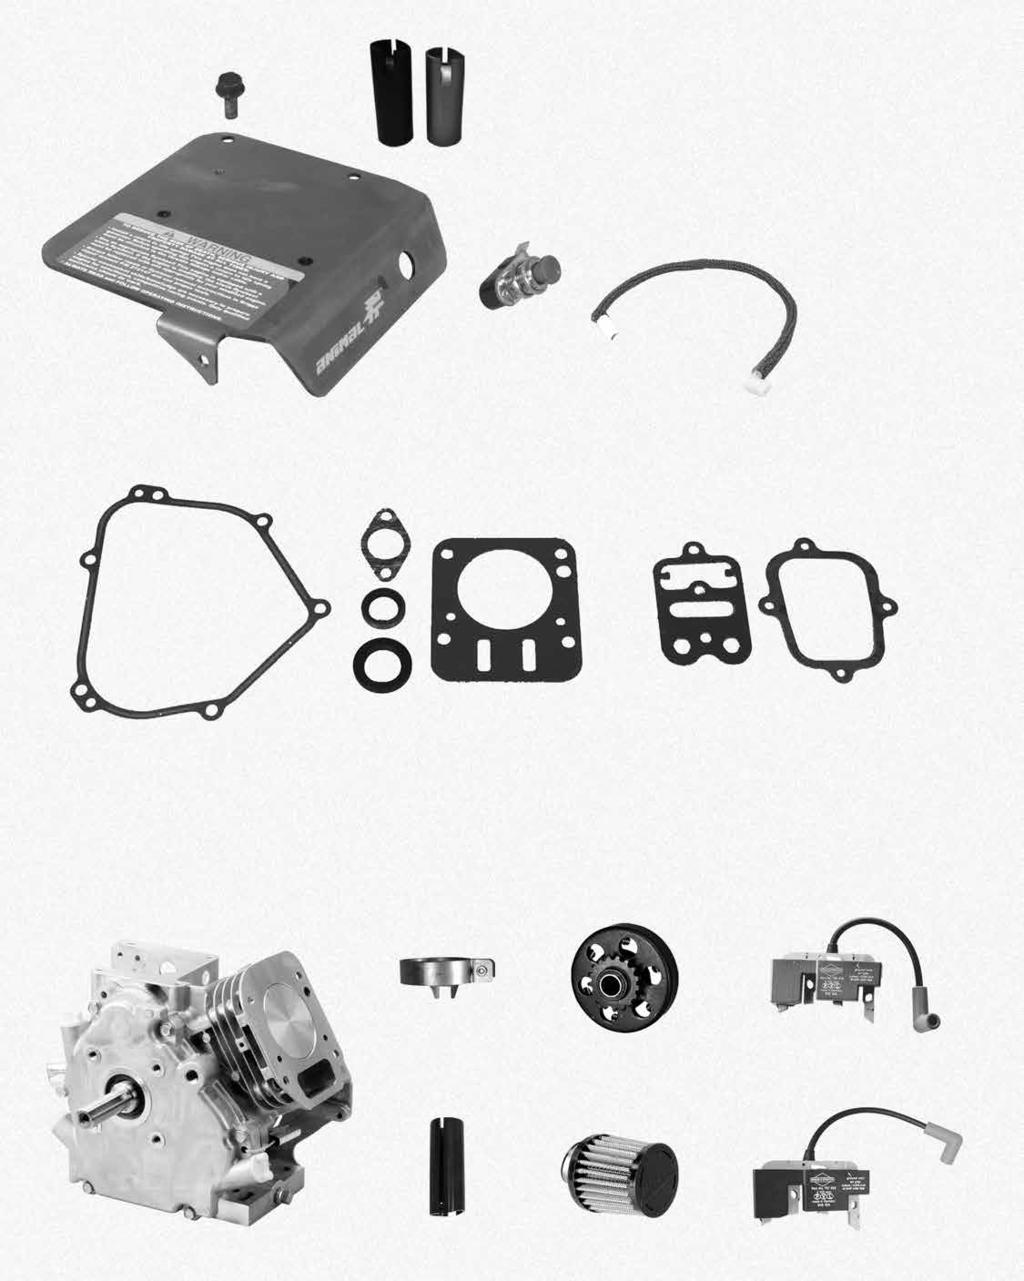 ANIMAL control bracket & gasket sets (Engine Model Series 124432) ANIMAL ENGINES 206 PARTS 699479 MetricScrew (Control Panel - M6 x 1) 555699 Control Panel *Included with 555631 Engine Gasket Set